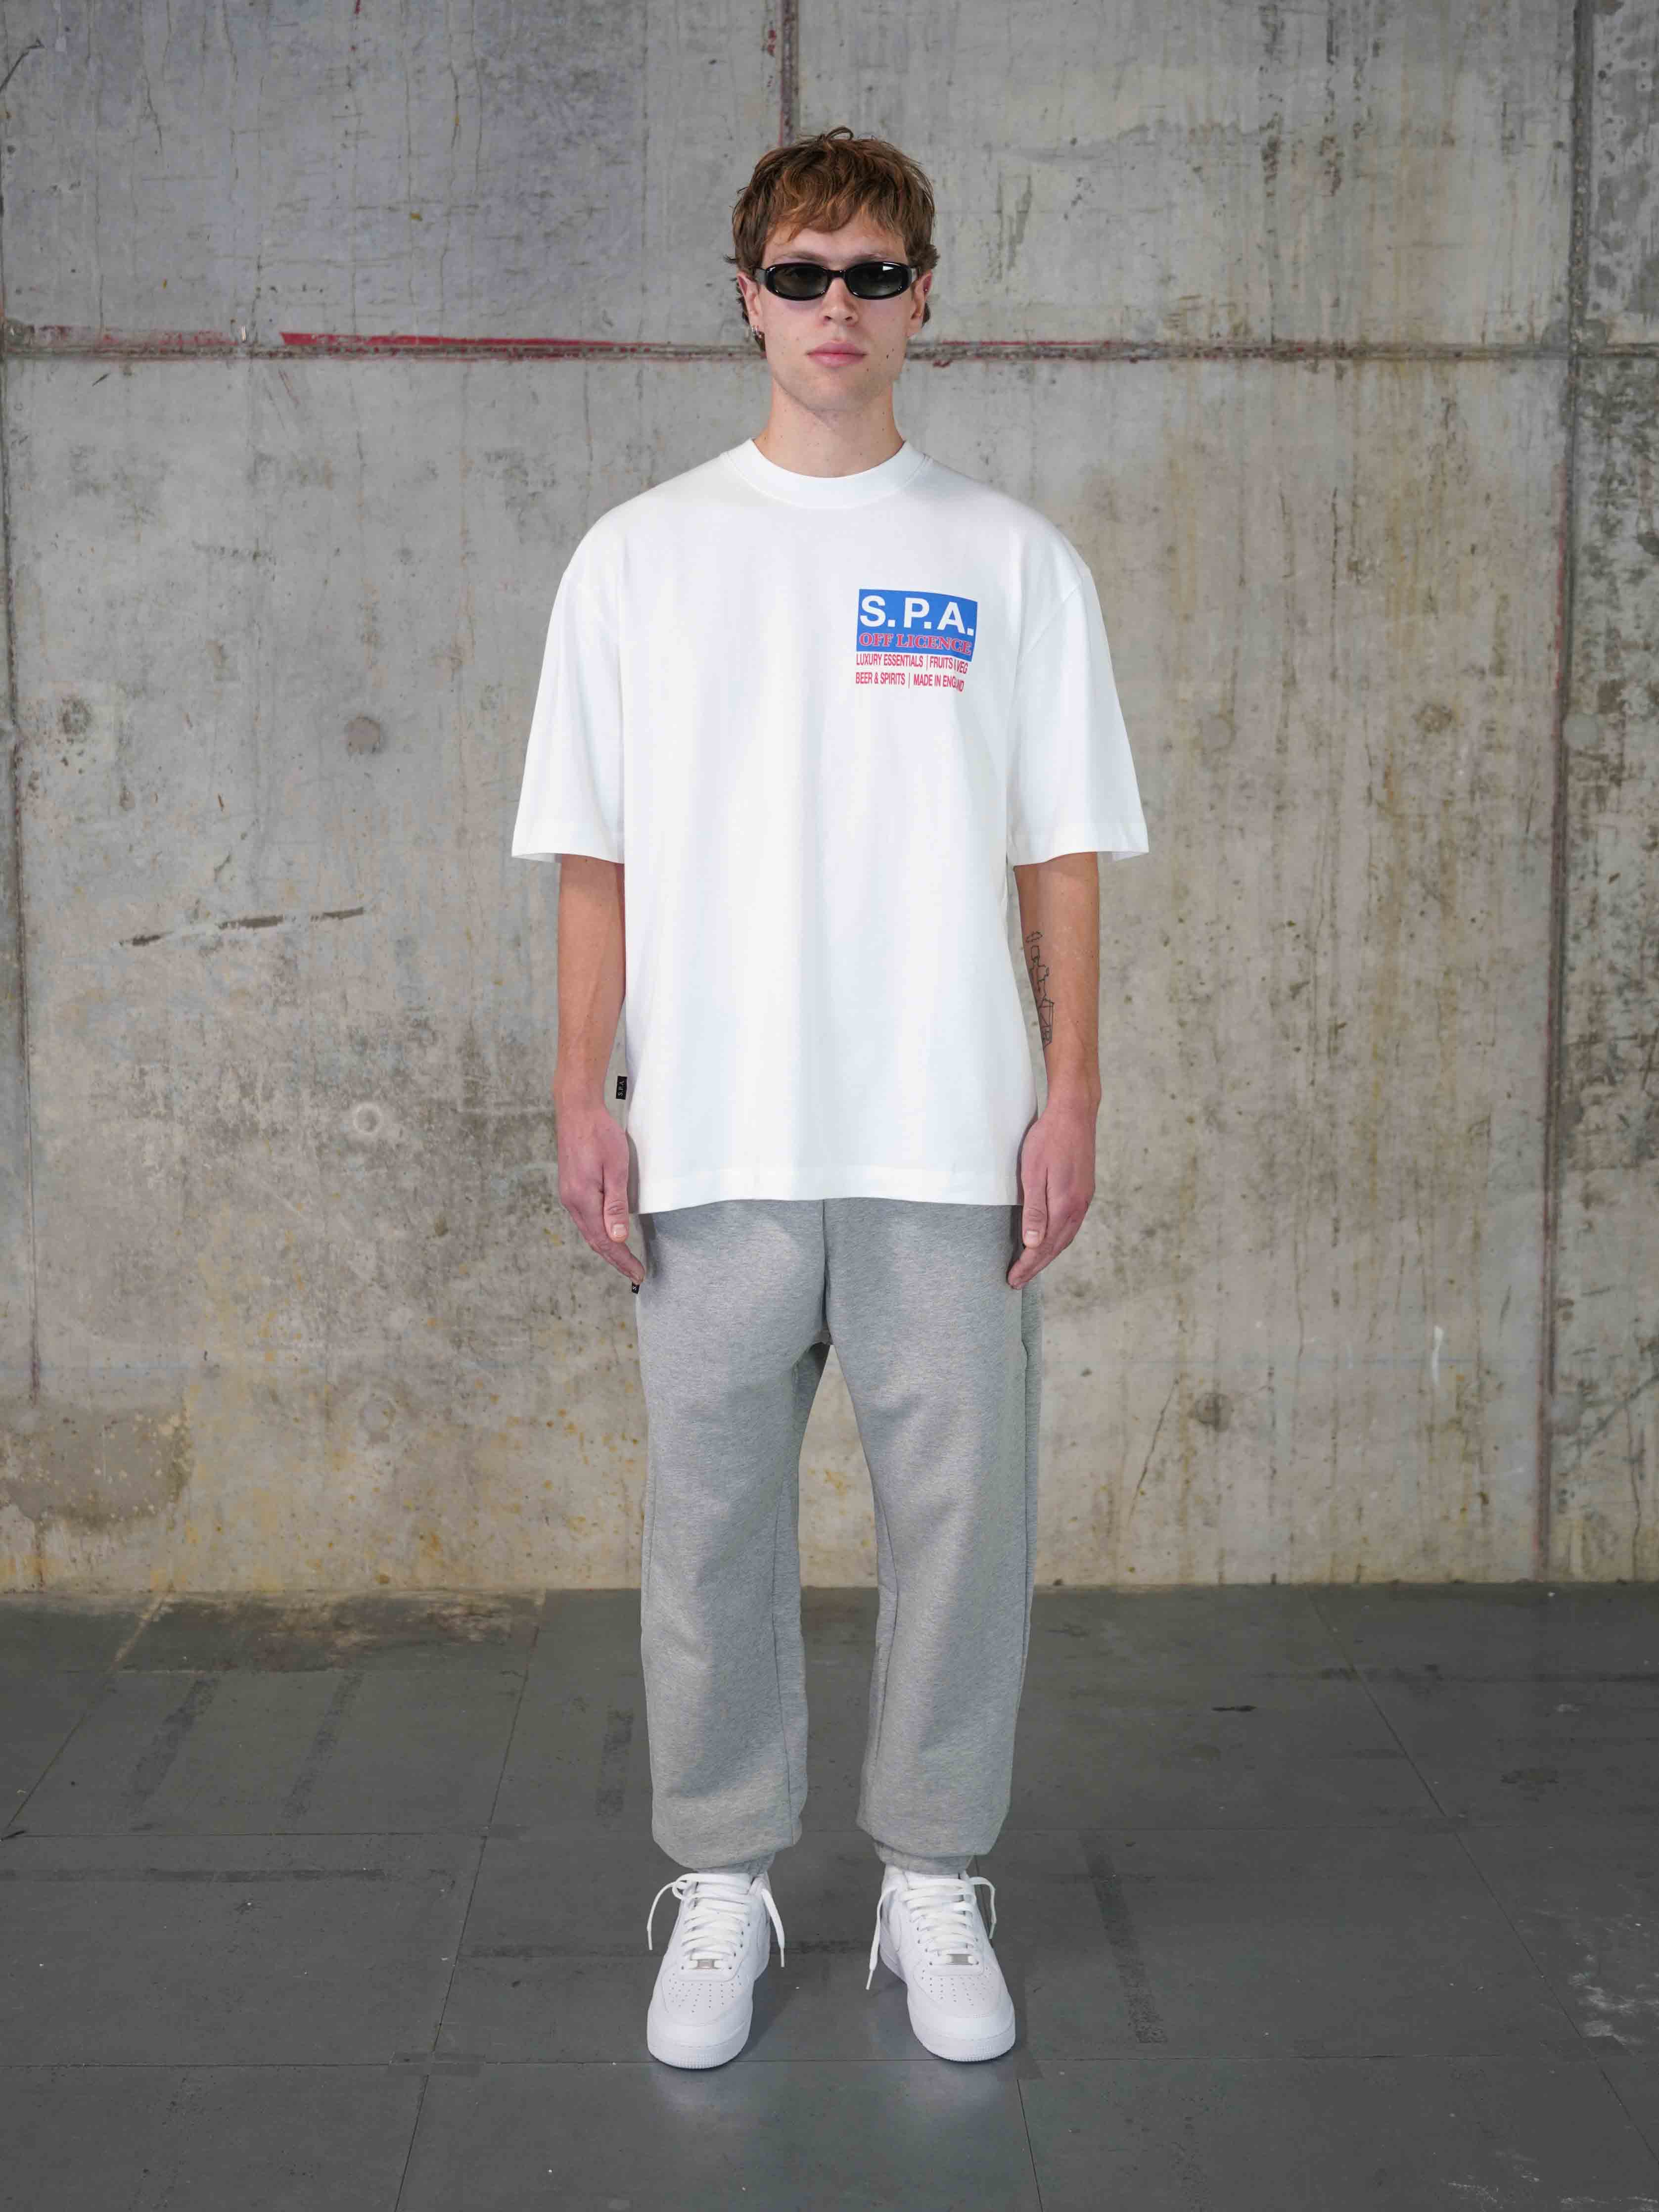 Off Licence T-shirt - White